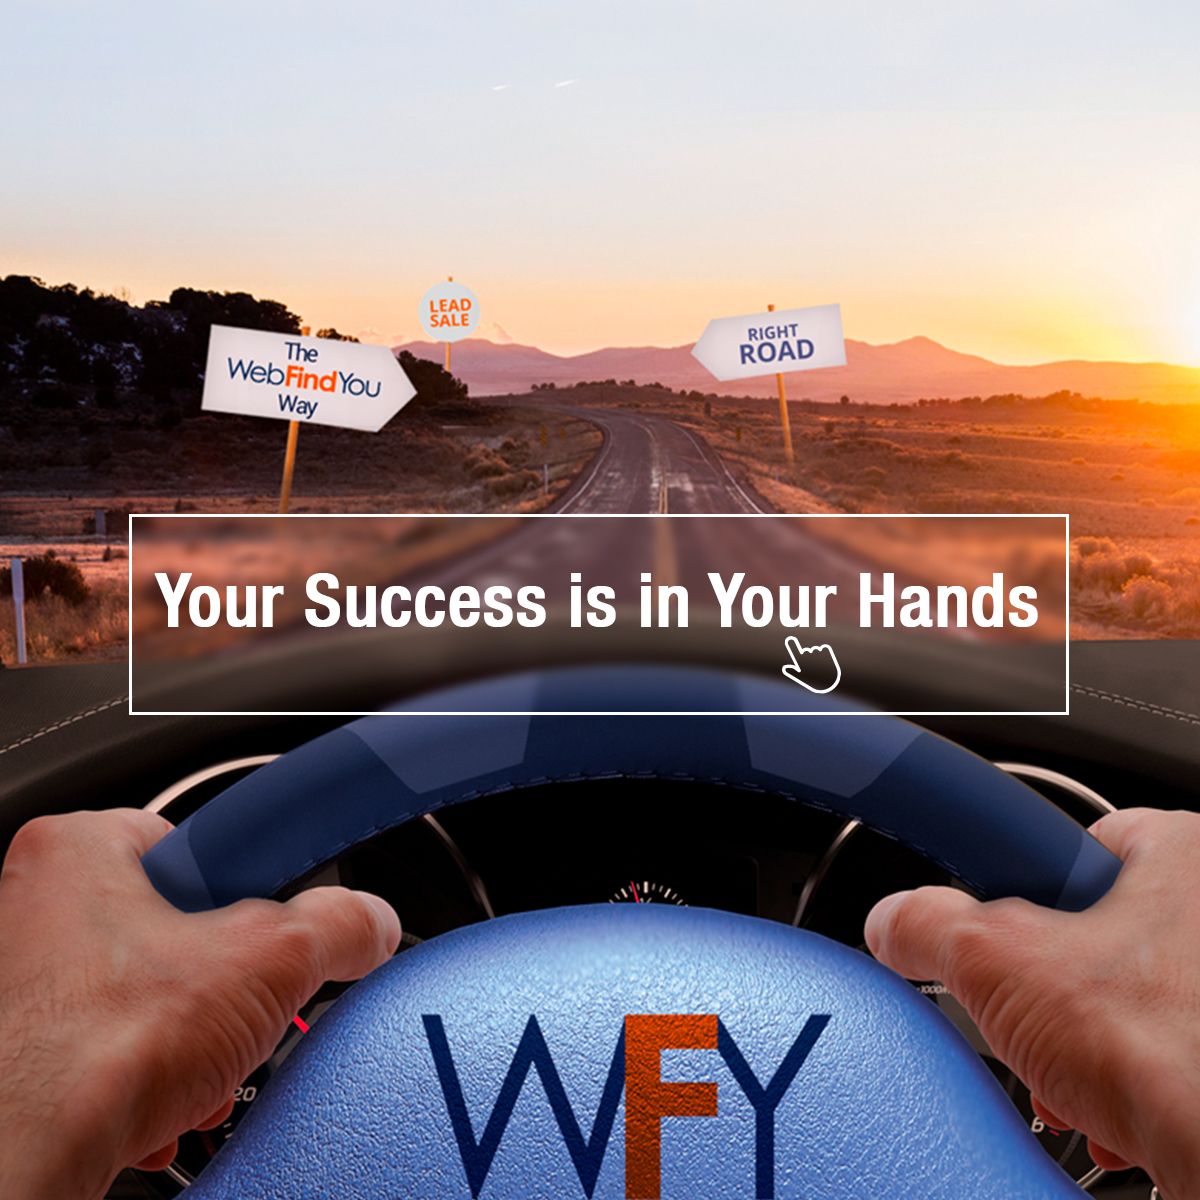 Your Success is in Your Hands